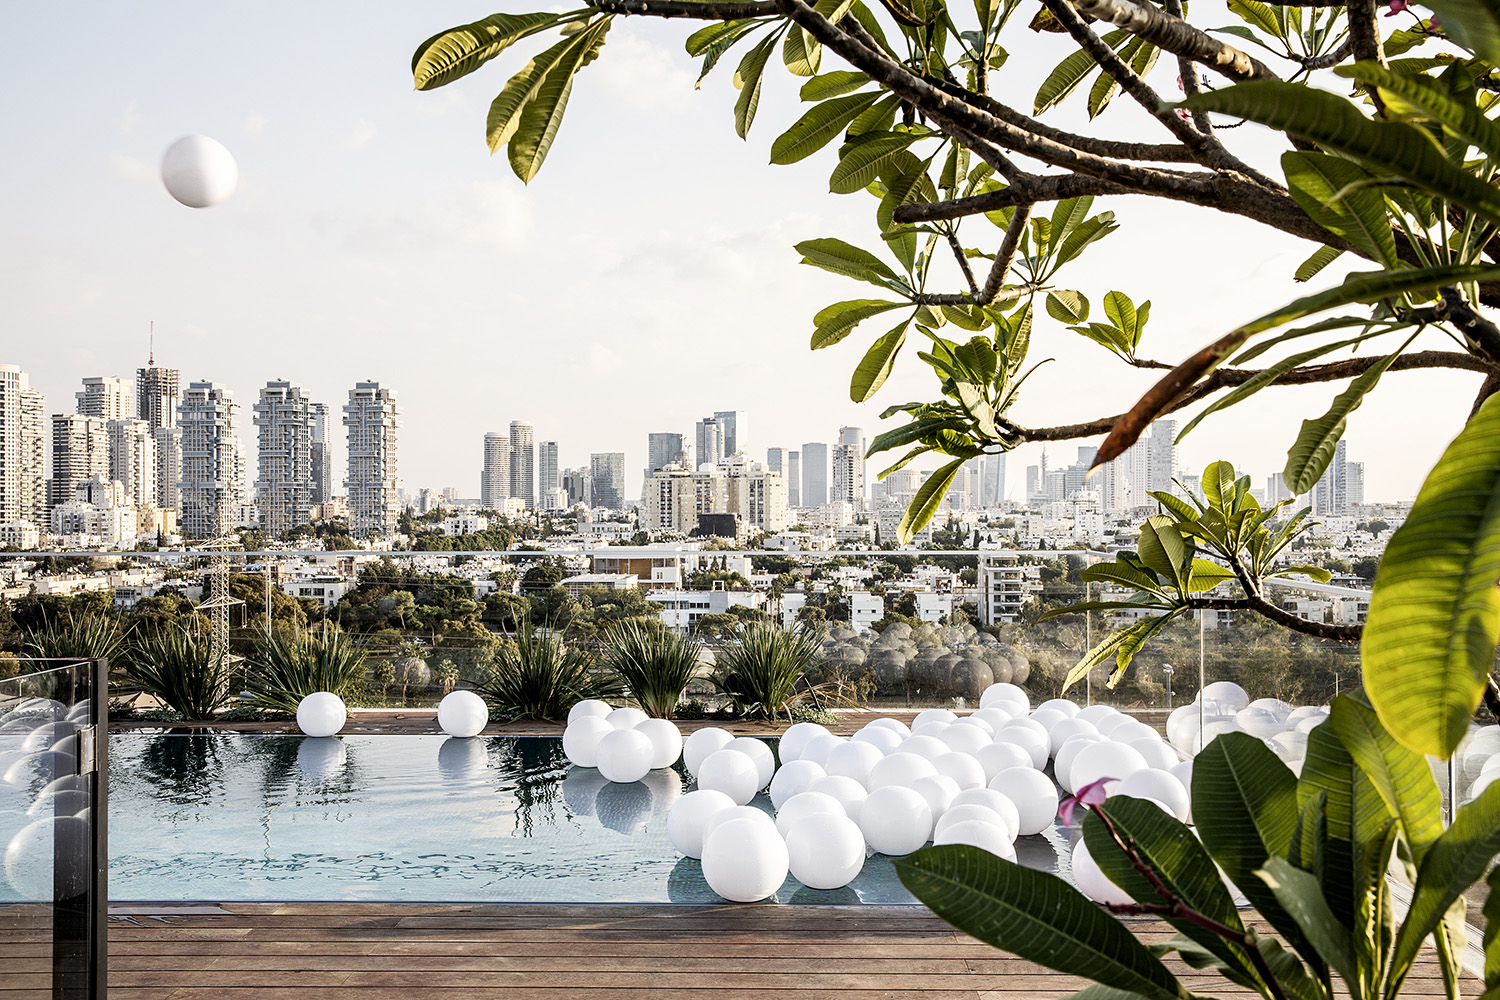 Premium Overflow Pool for the Roof Terrace in Israel